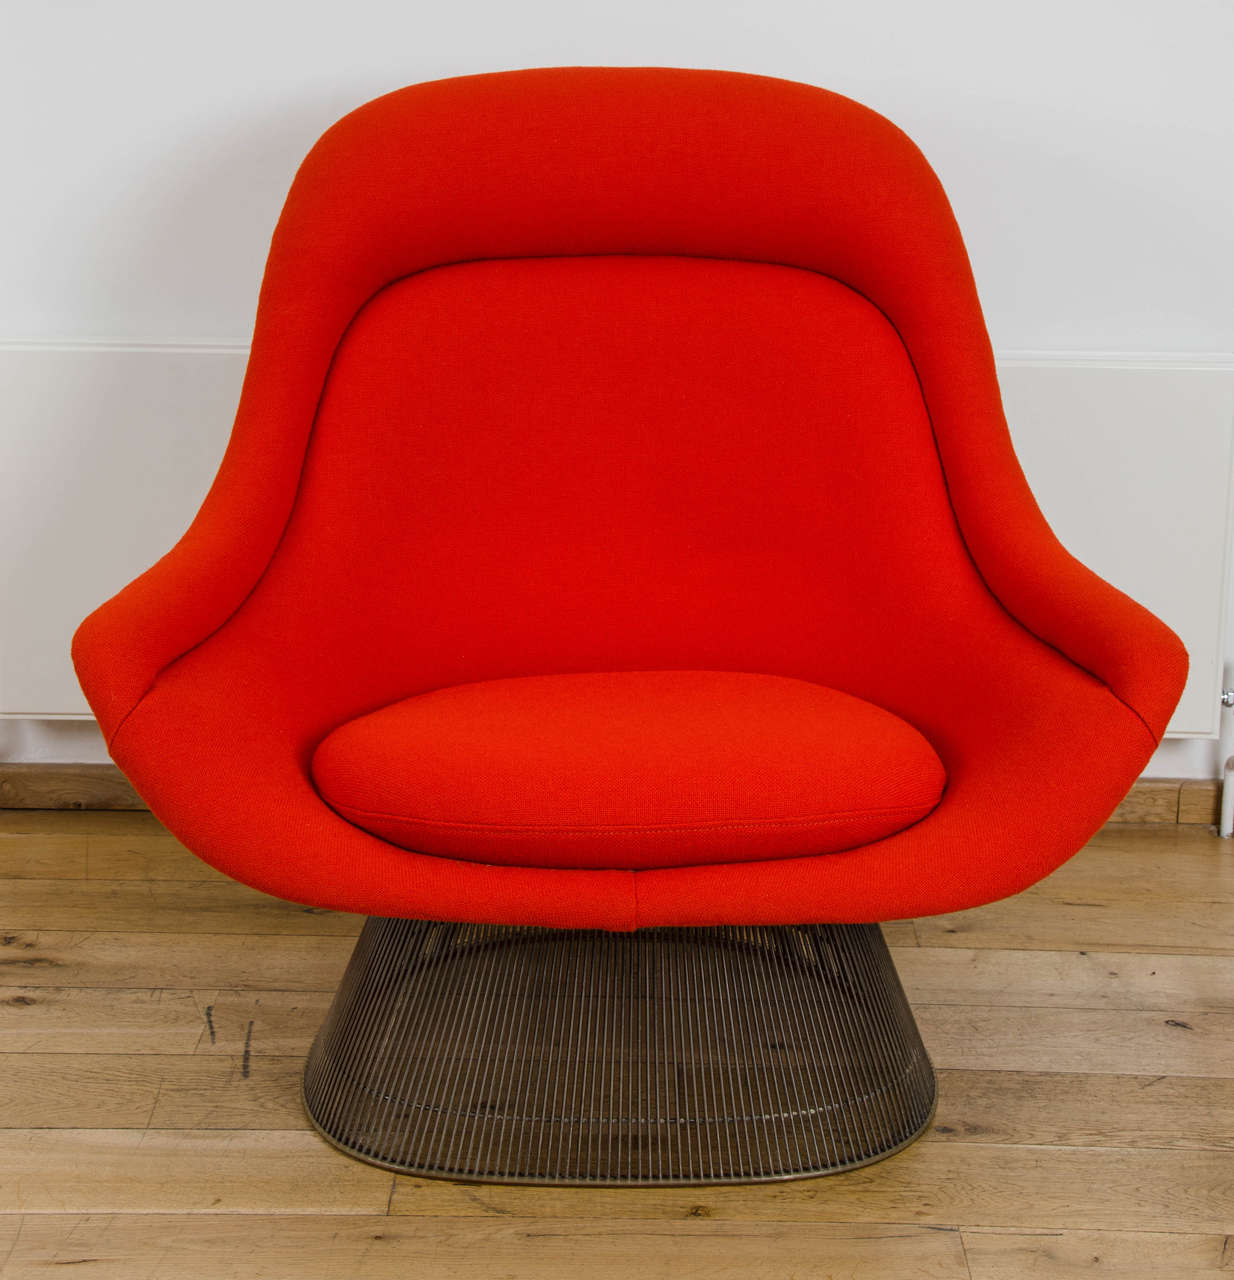 Easy chair by Warren Platner, designed 1966, for Knoll
frame constructed of nickel-plated rods, re-upholstered in Scandinavian poppy red wool.